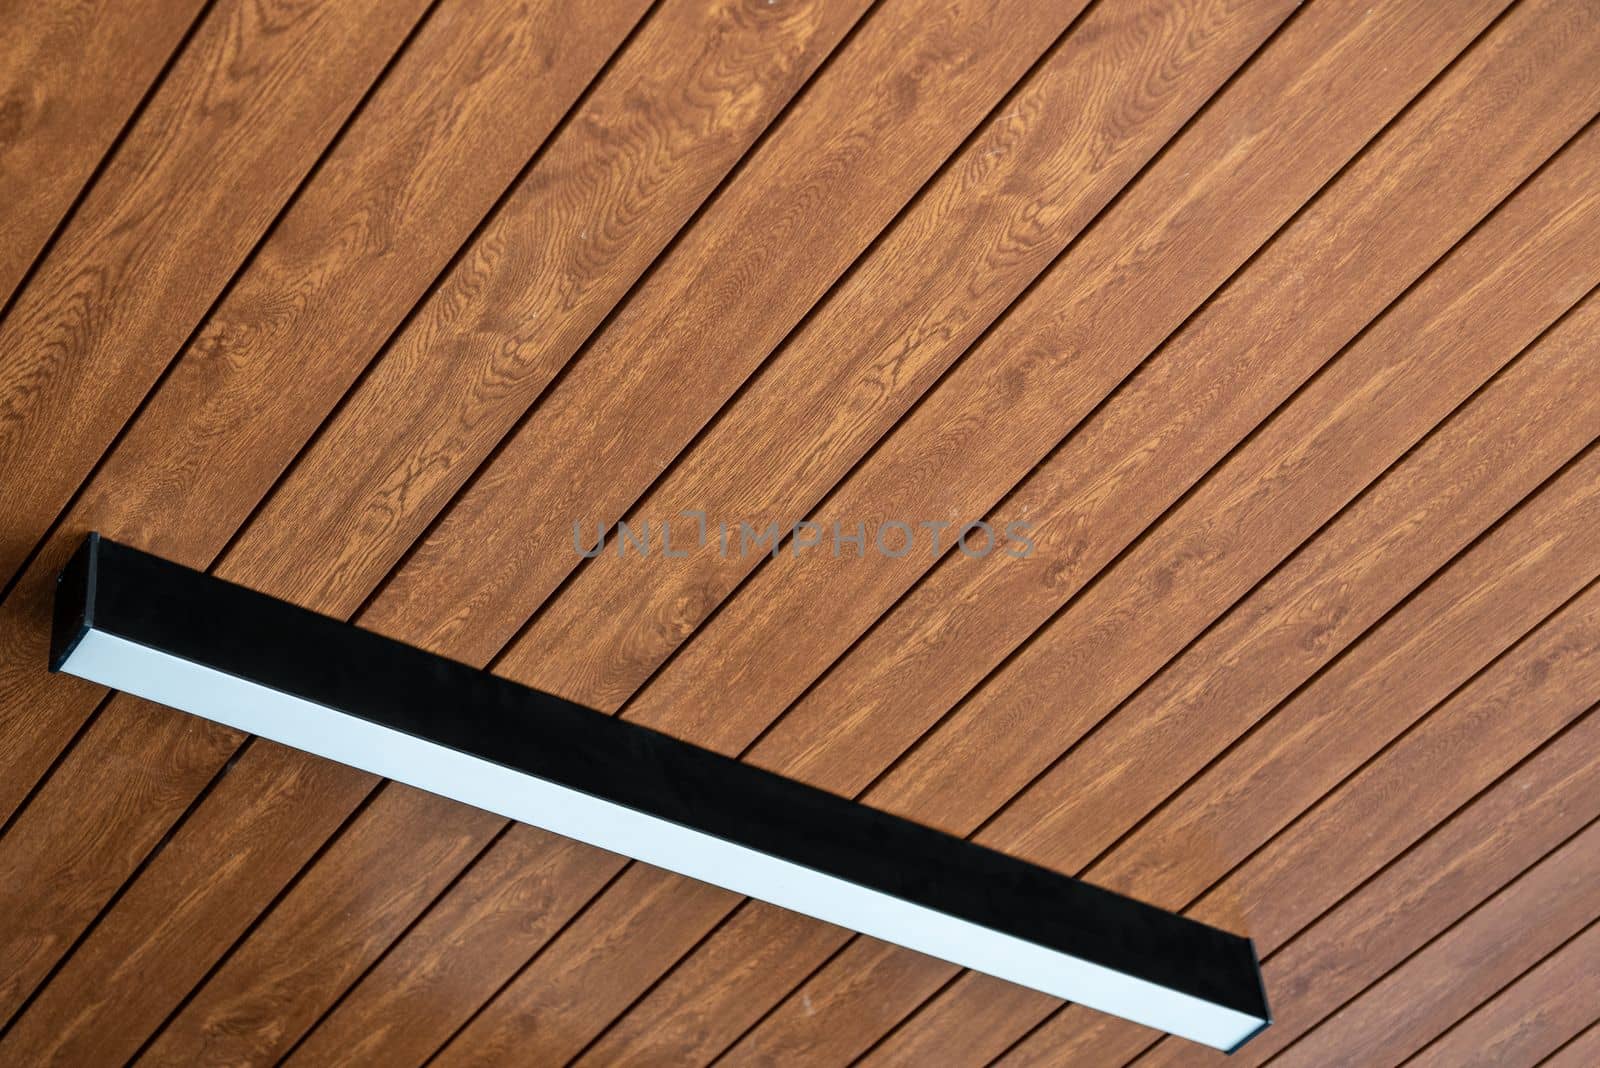 PVC ceiling panel covered with wood-like vinyl with modern lighting installed on it